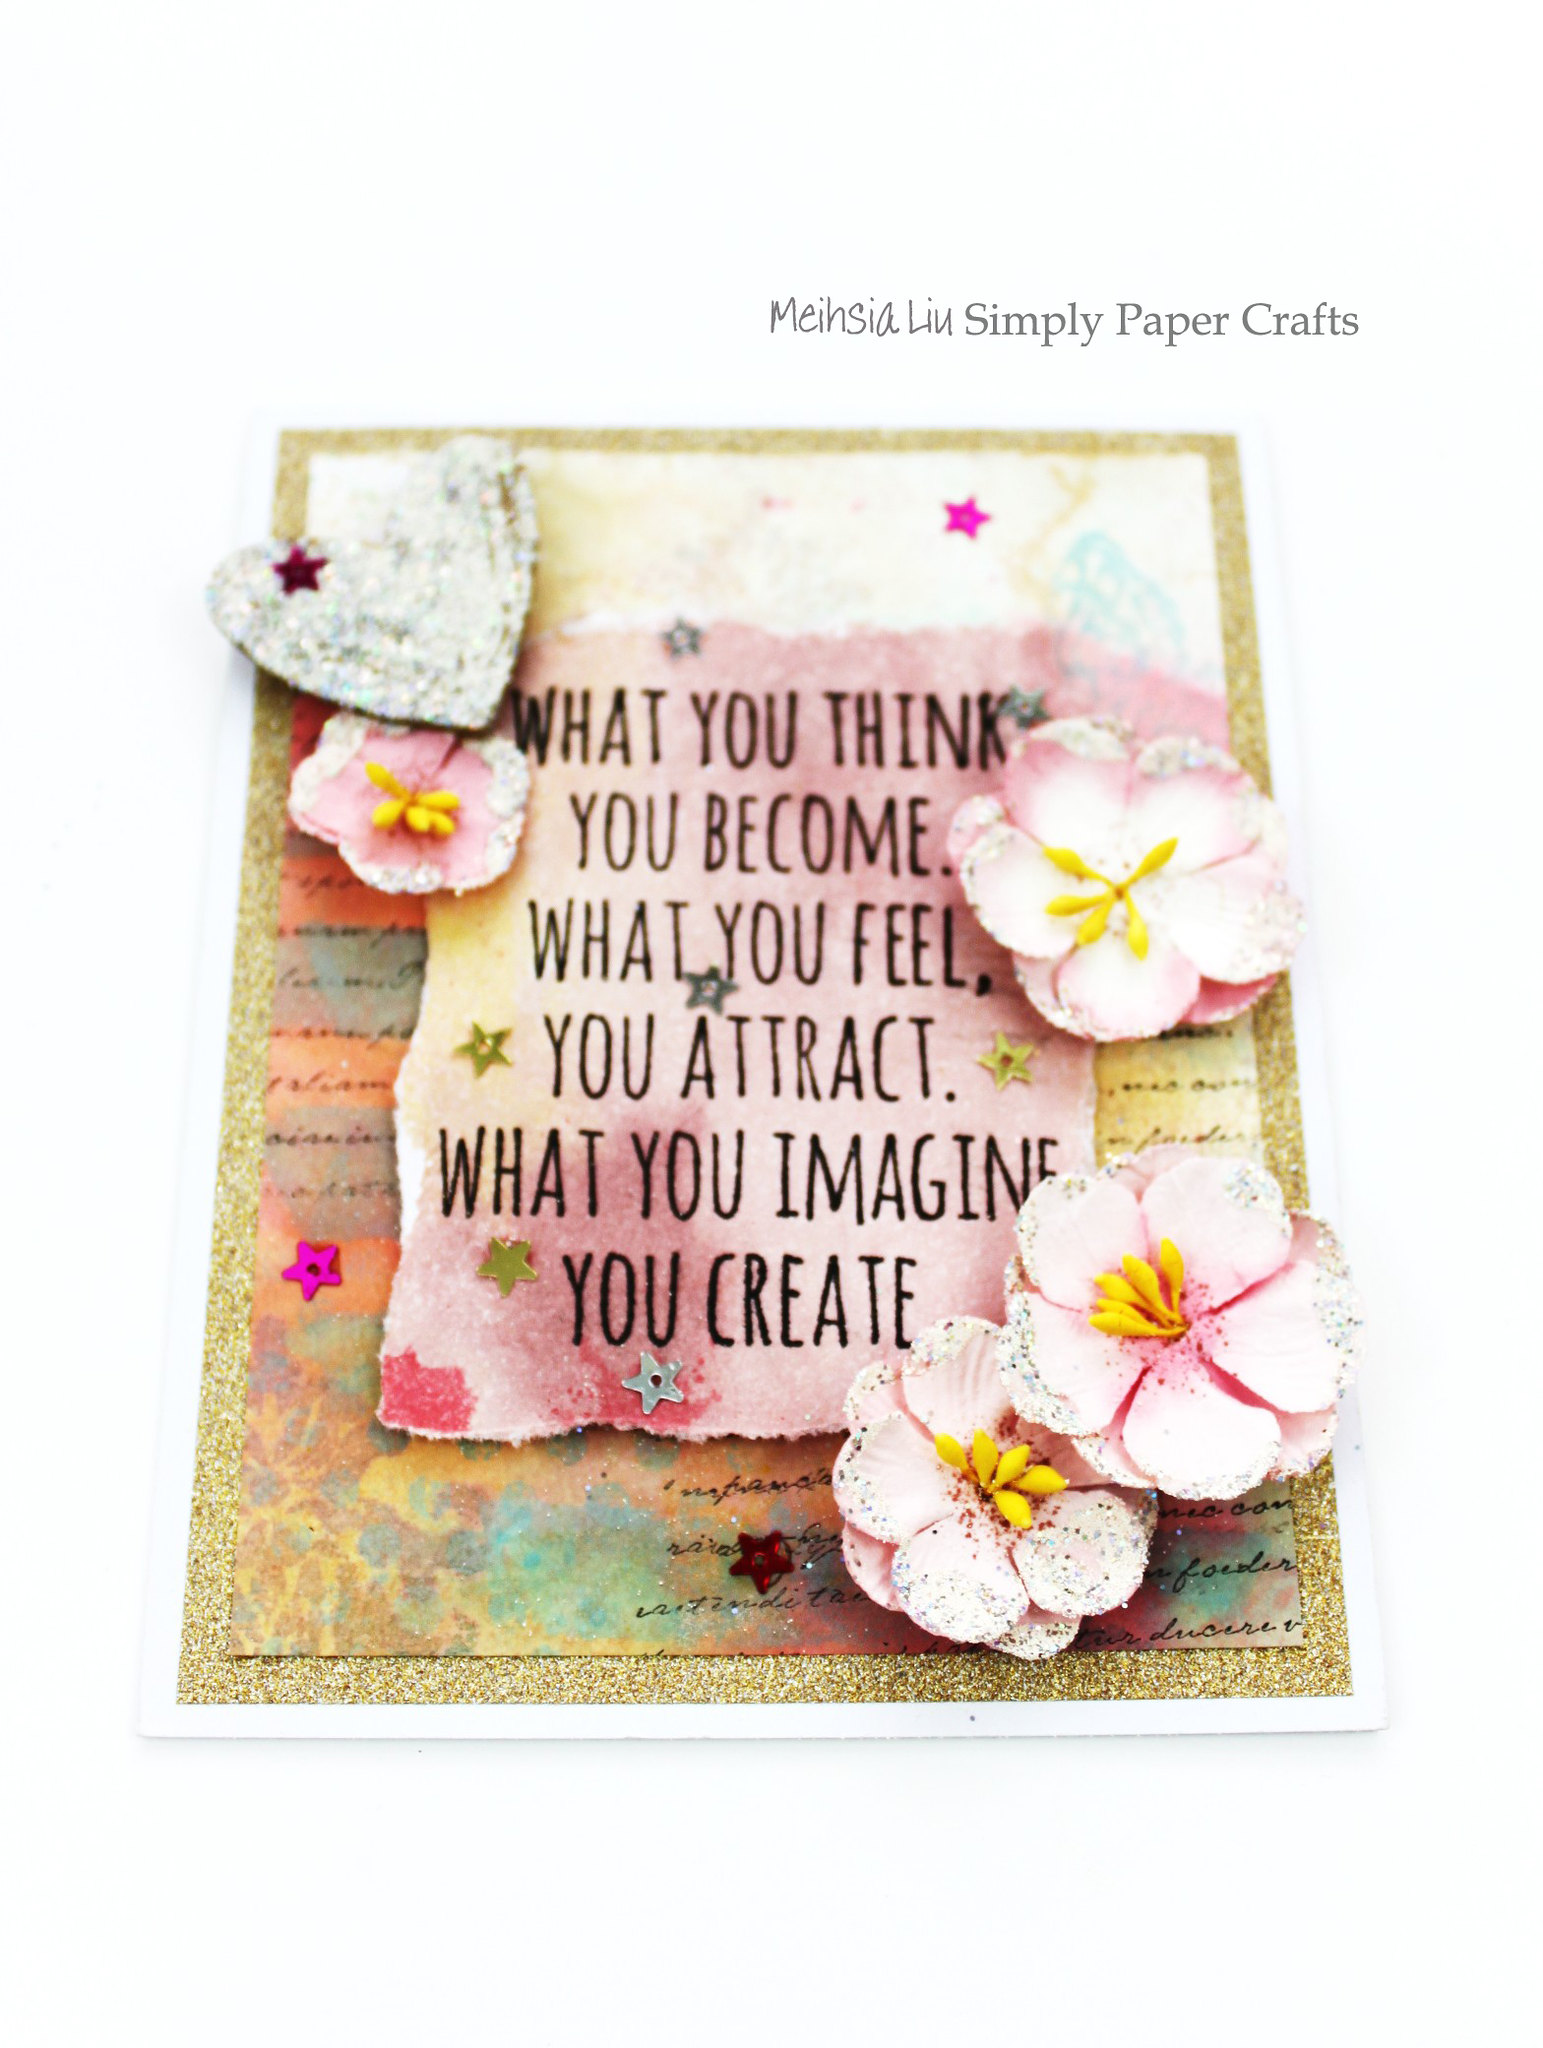 Meihsia Liu Simply Paper Crafts Mixed Media Card Sparkle Simon Says Stamp Tim Holtz Prima Flowers